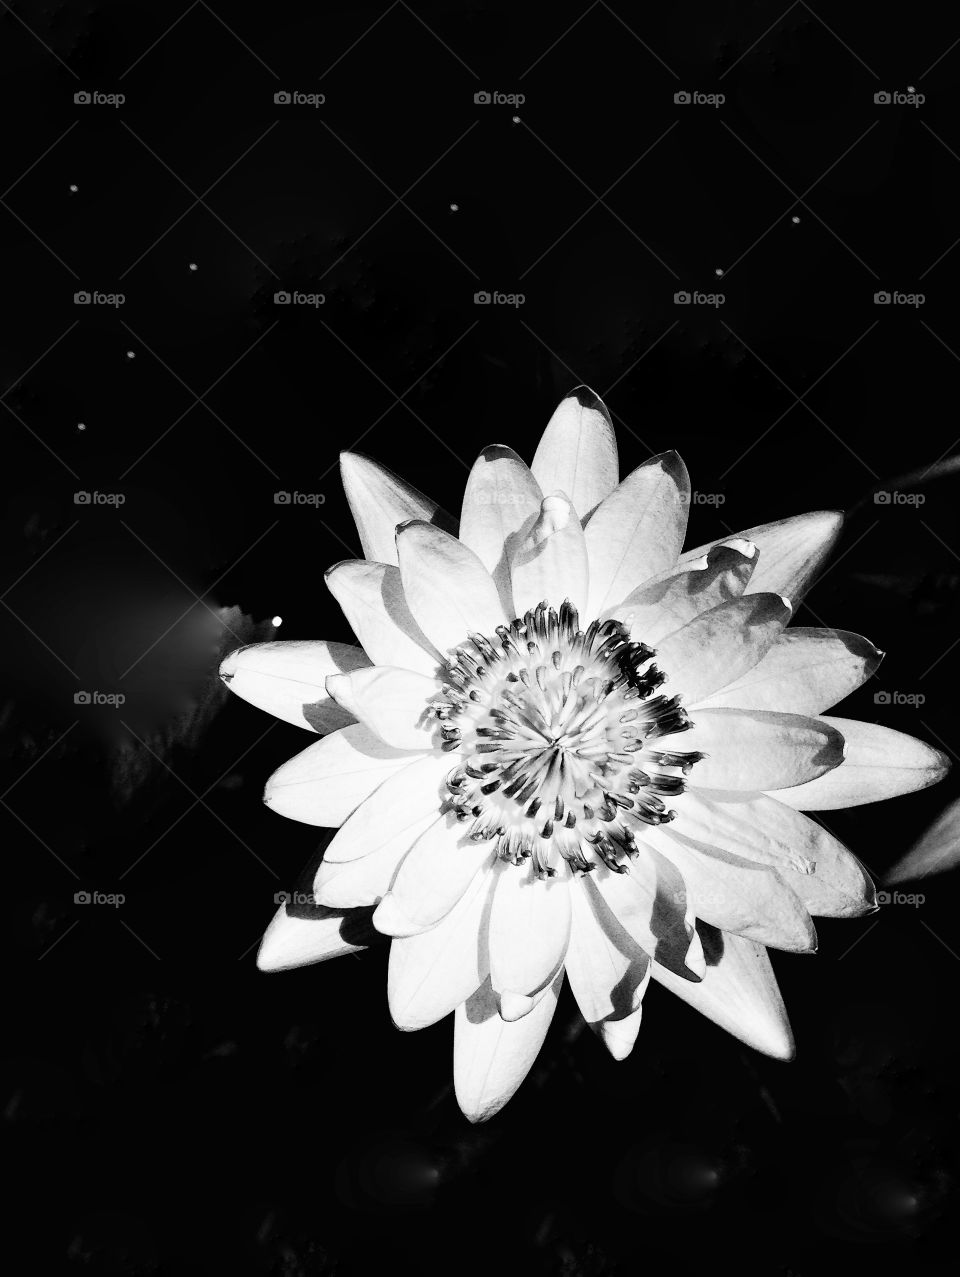 Galaxy and lotus. Shades and lights of lotus photo on graphic of universe